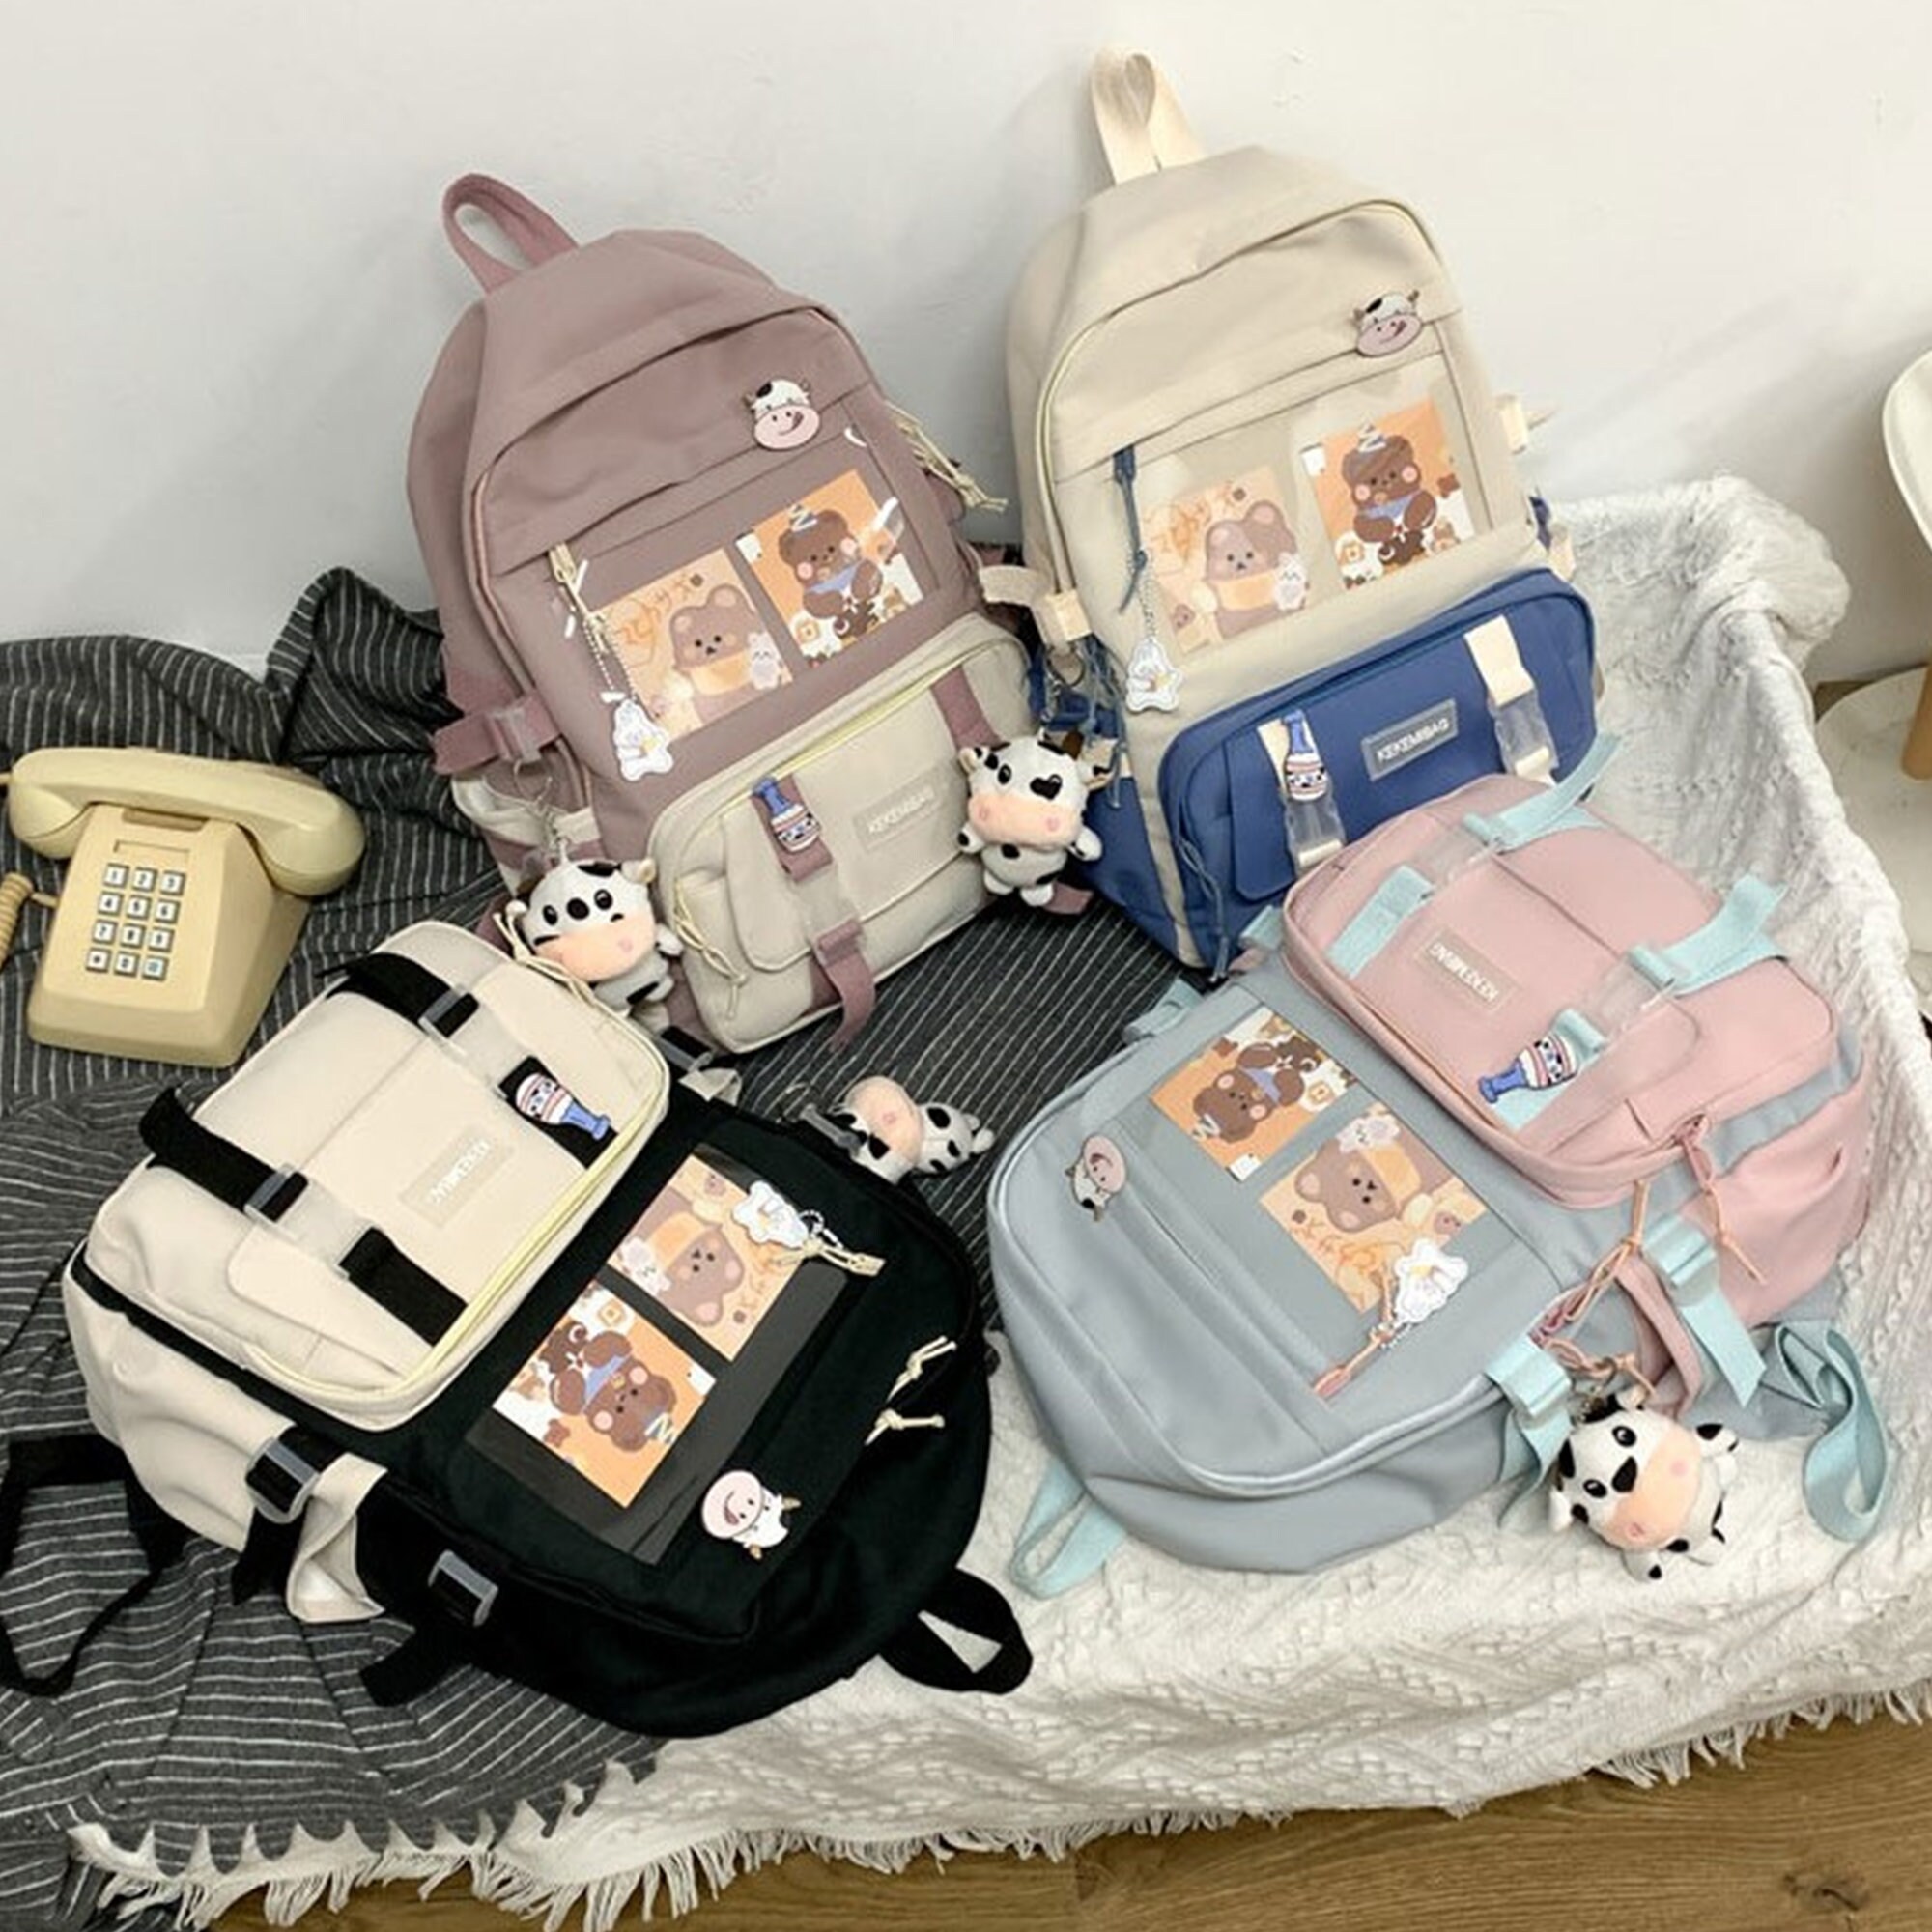 Cute Anime Backpack School Bag with Kawaii Pin and Accessories Nylon  Lightweight | eBay